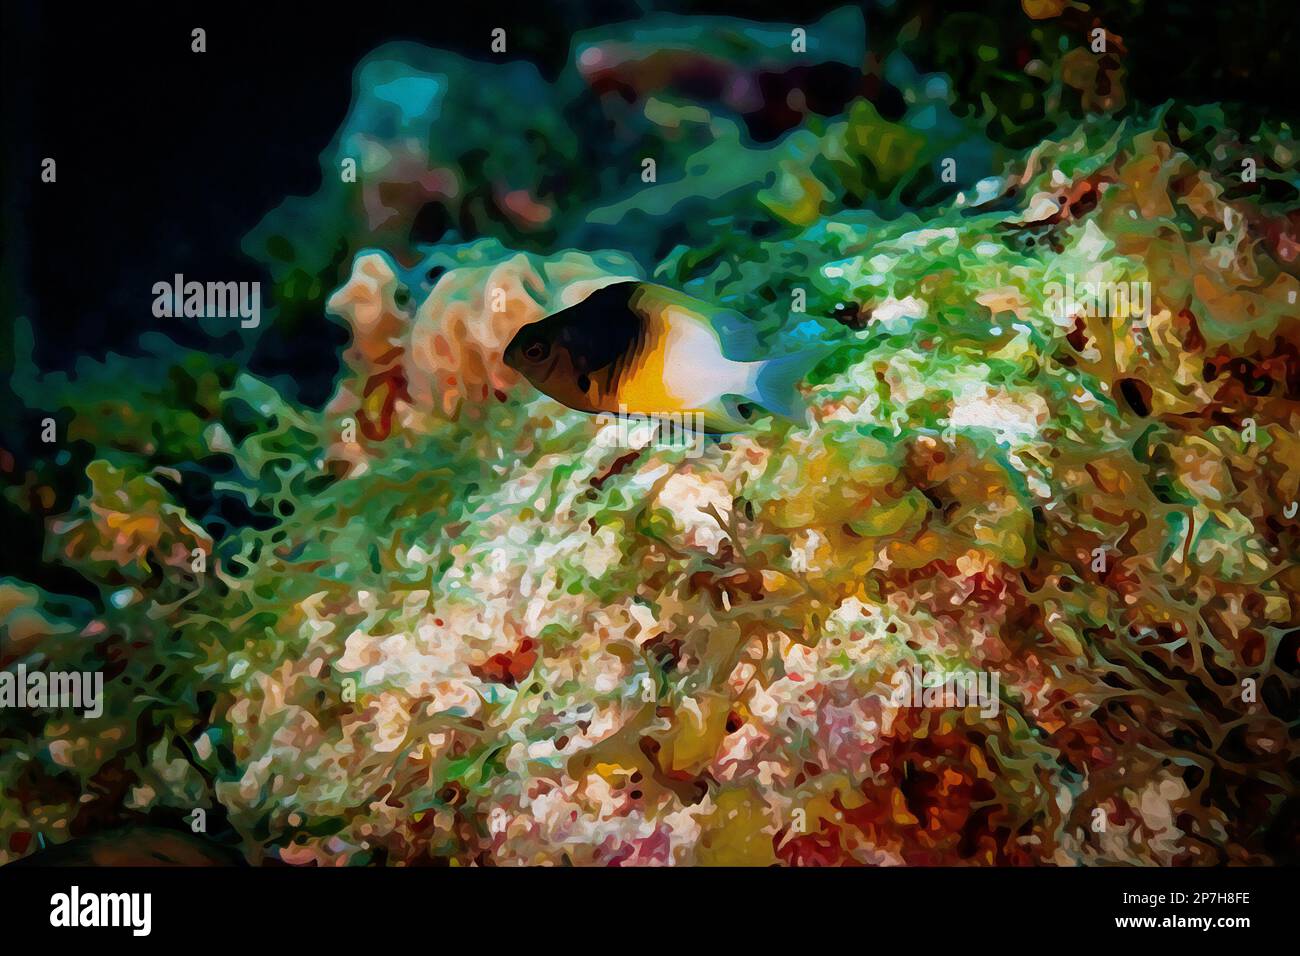 Digitally created watercolor painting of a bicolor damsel fish swimming above the coral reef. Stock Photo